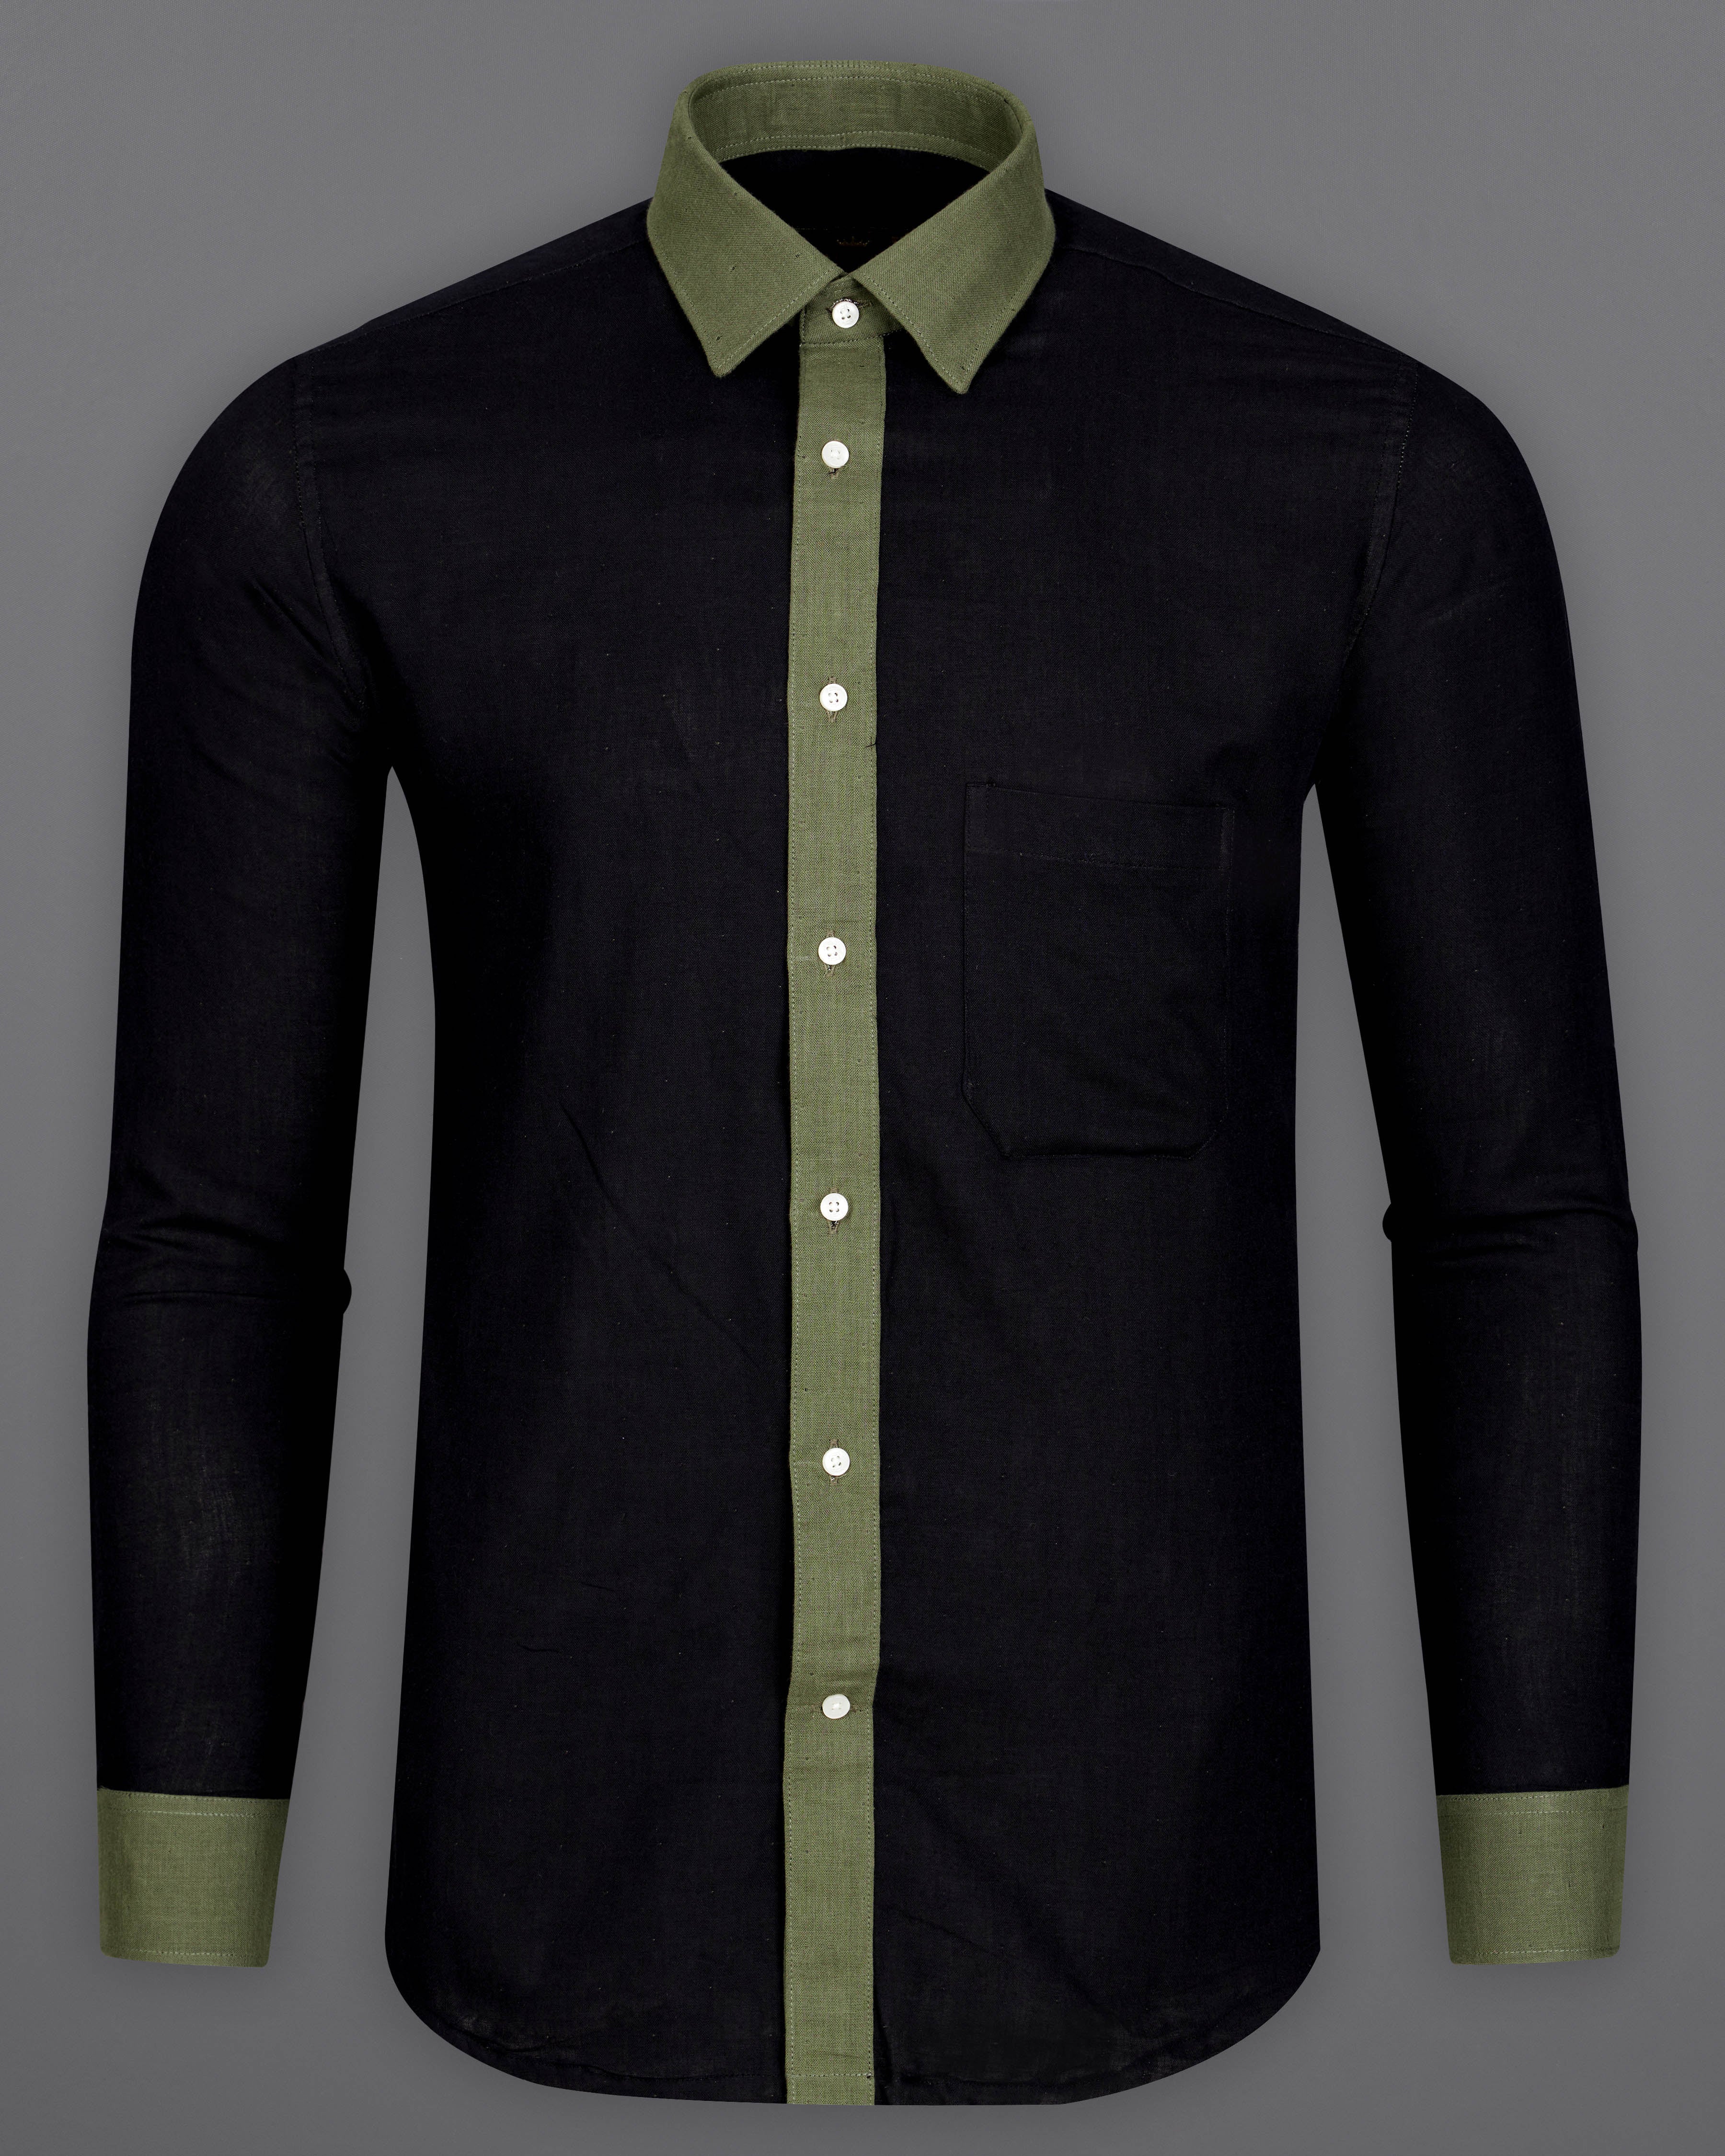 Jade Black with Green Patch Work Luxurious Linen Shirt 9328-P207-38, 9328-P207-H-38, 9328-P207-39, 9328-P207-H-39, 9328-P207-40, 9328-P207-H-40, 9328-P207-42, 9328-P207-H-42, 9328-P207-44, 9328-P207-H-44, 9328-P207-46, 9328-P207-H-46, 9328-P207-48, 9328-P207-H-48, 9328-P207-50, 9328-P207-H-50, 9328-P207-52, 9328-P207-H-52